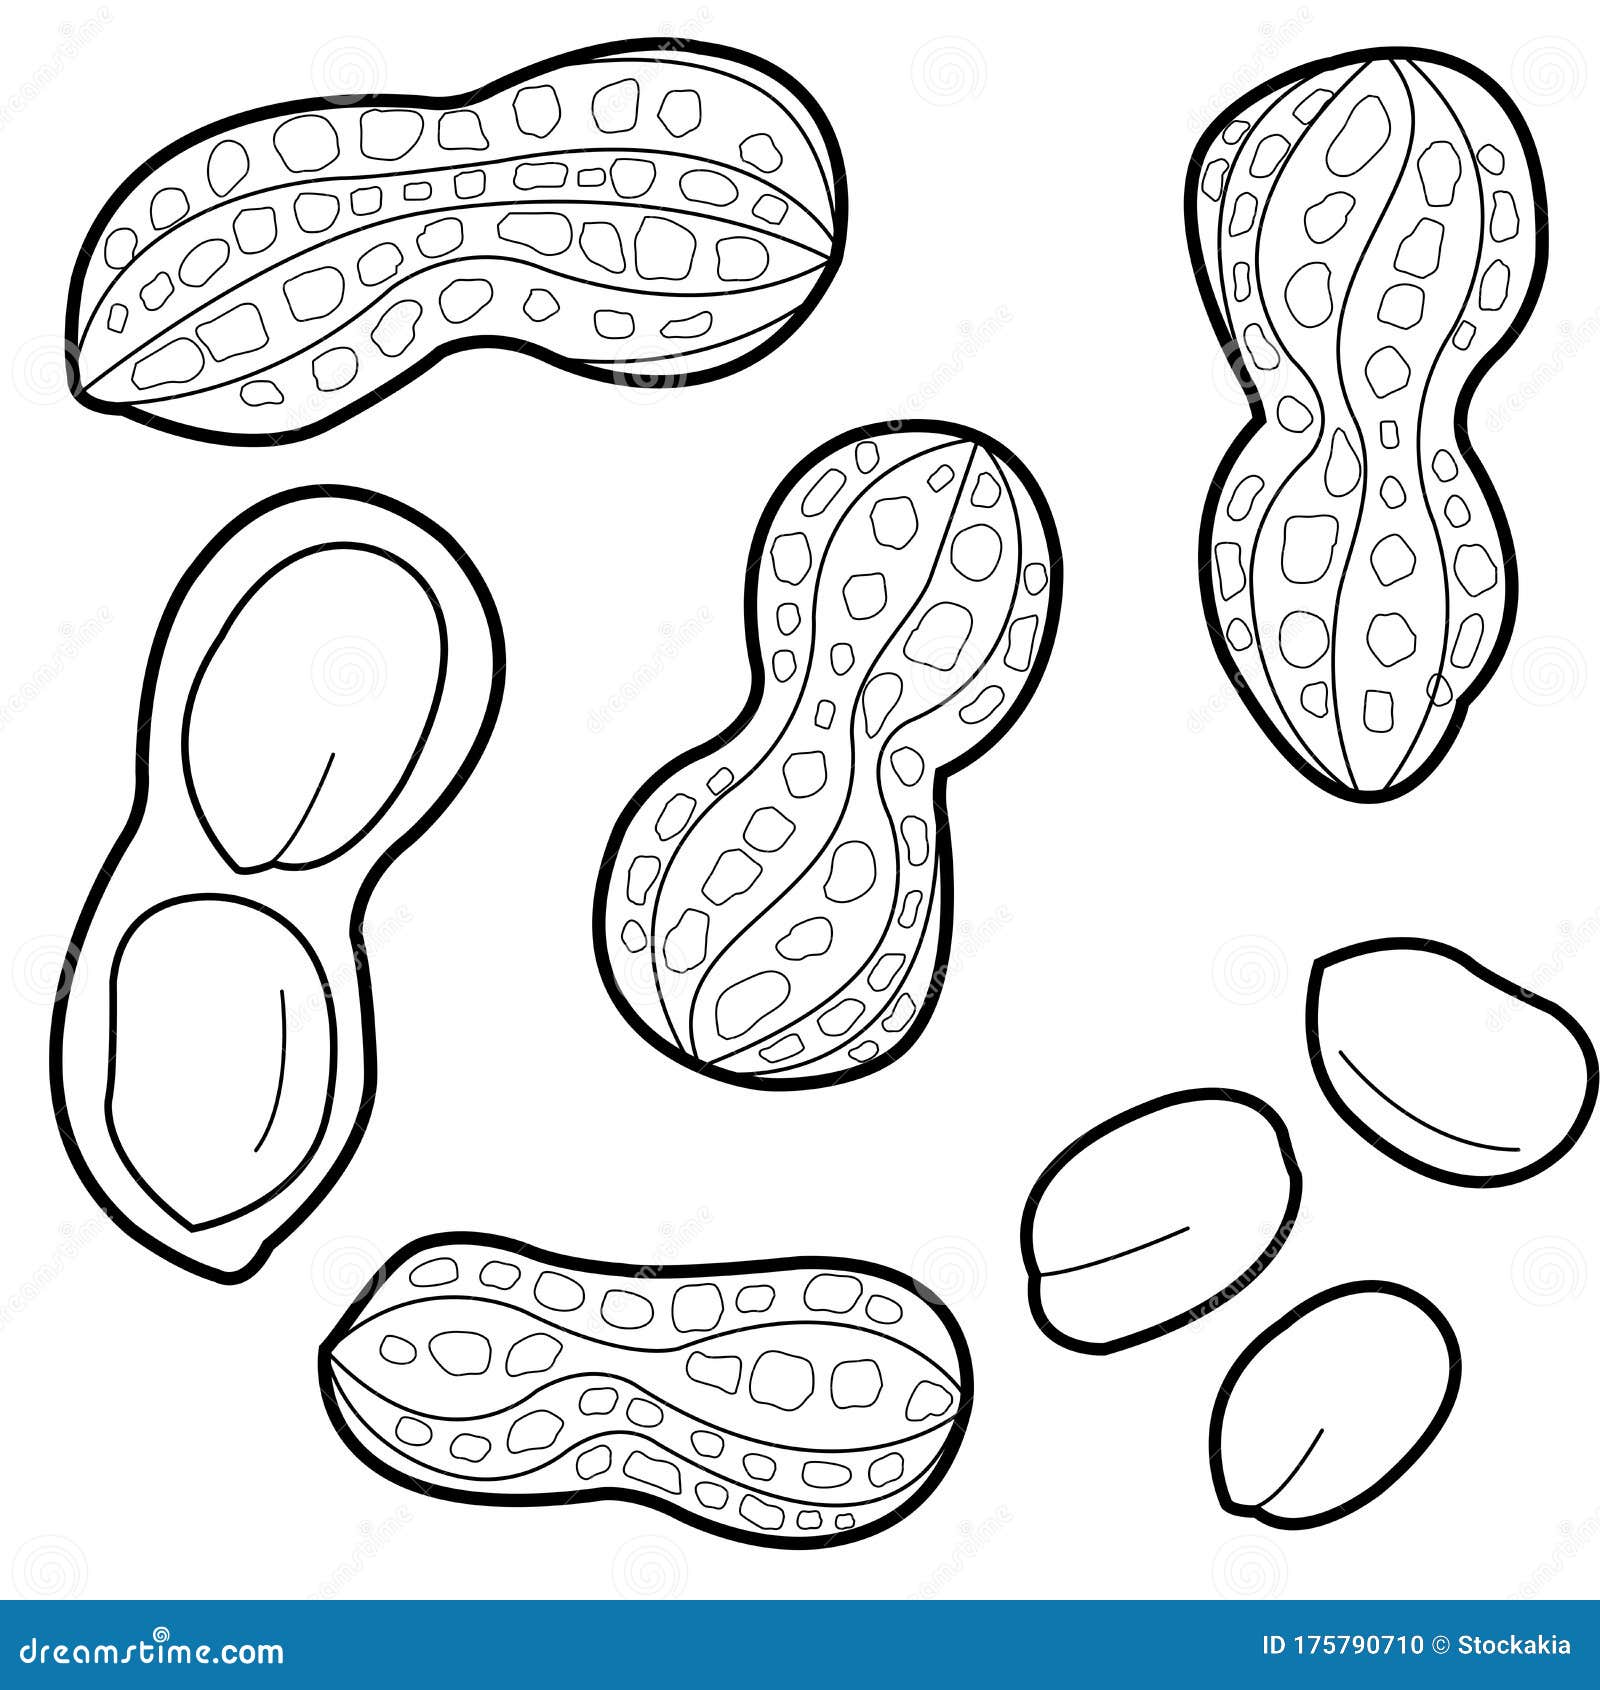 peanuts on white background. peanut collection.  black and white coloring page.